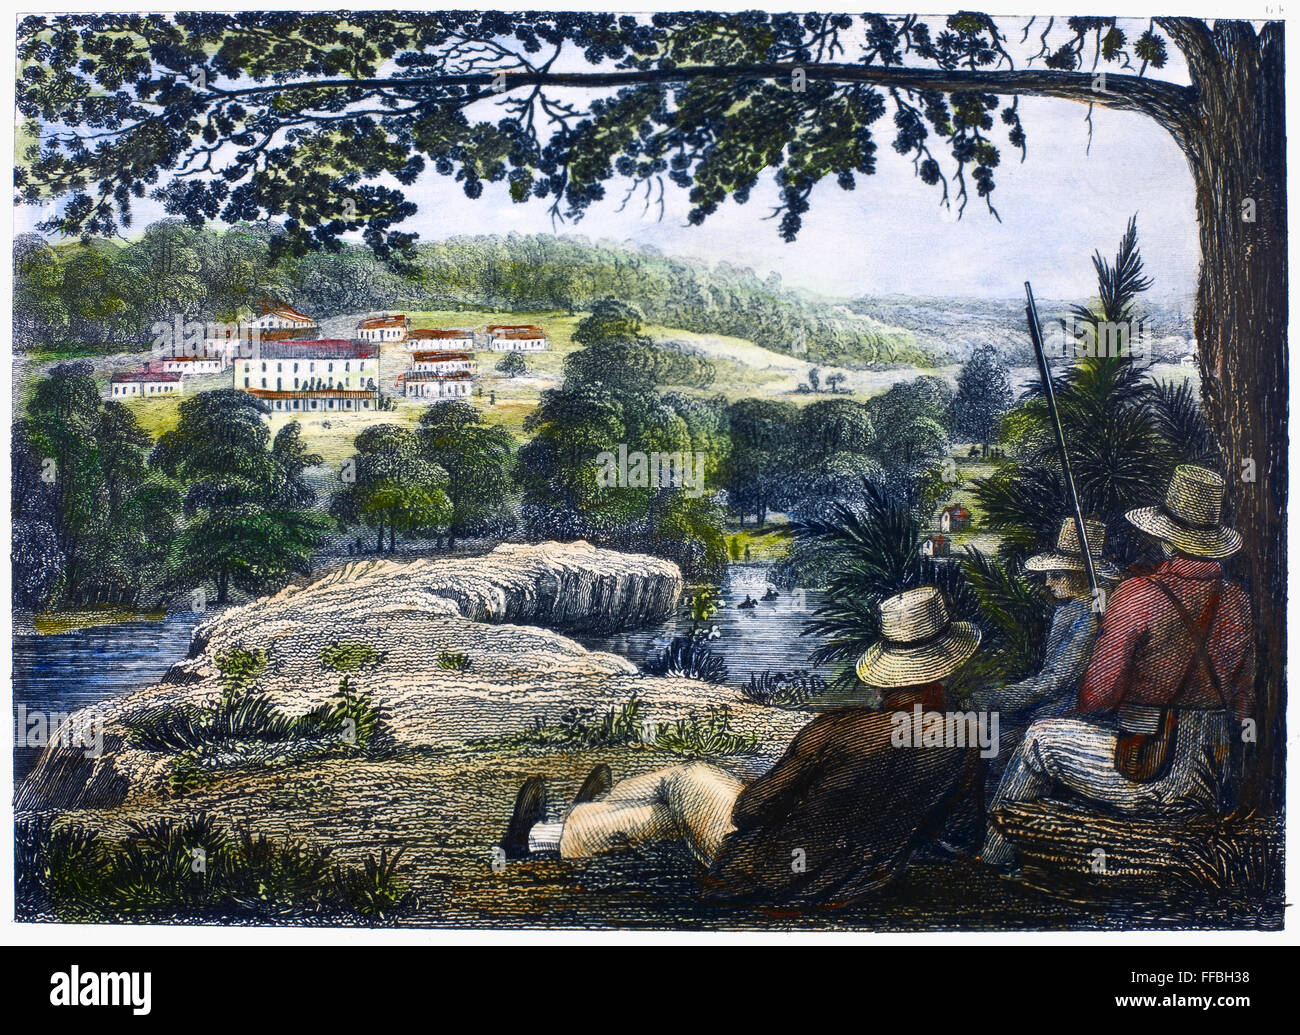 VIRGINIA: PANORAMABLICK, 1831. /Nview von Shannondale Springs, Virginia. Stahlstich, 1831. Stockfoto